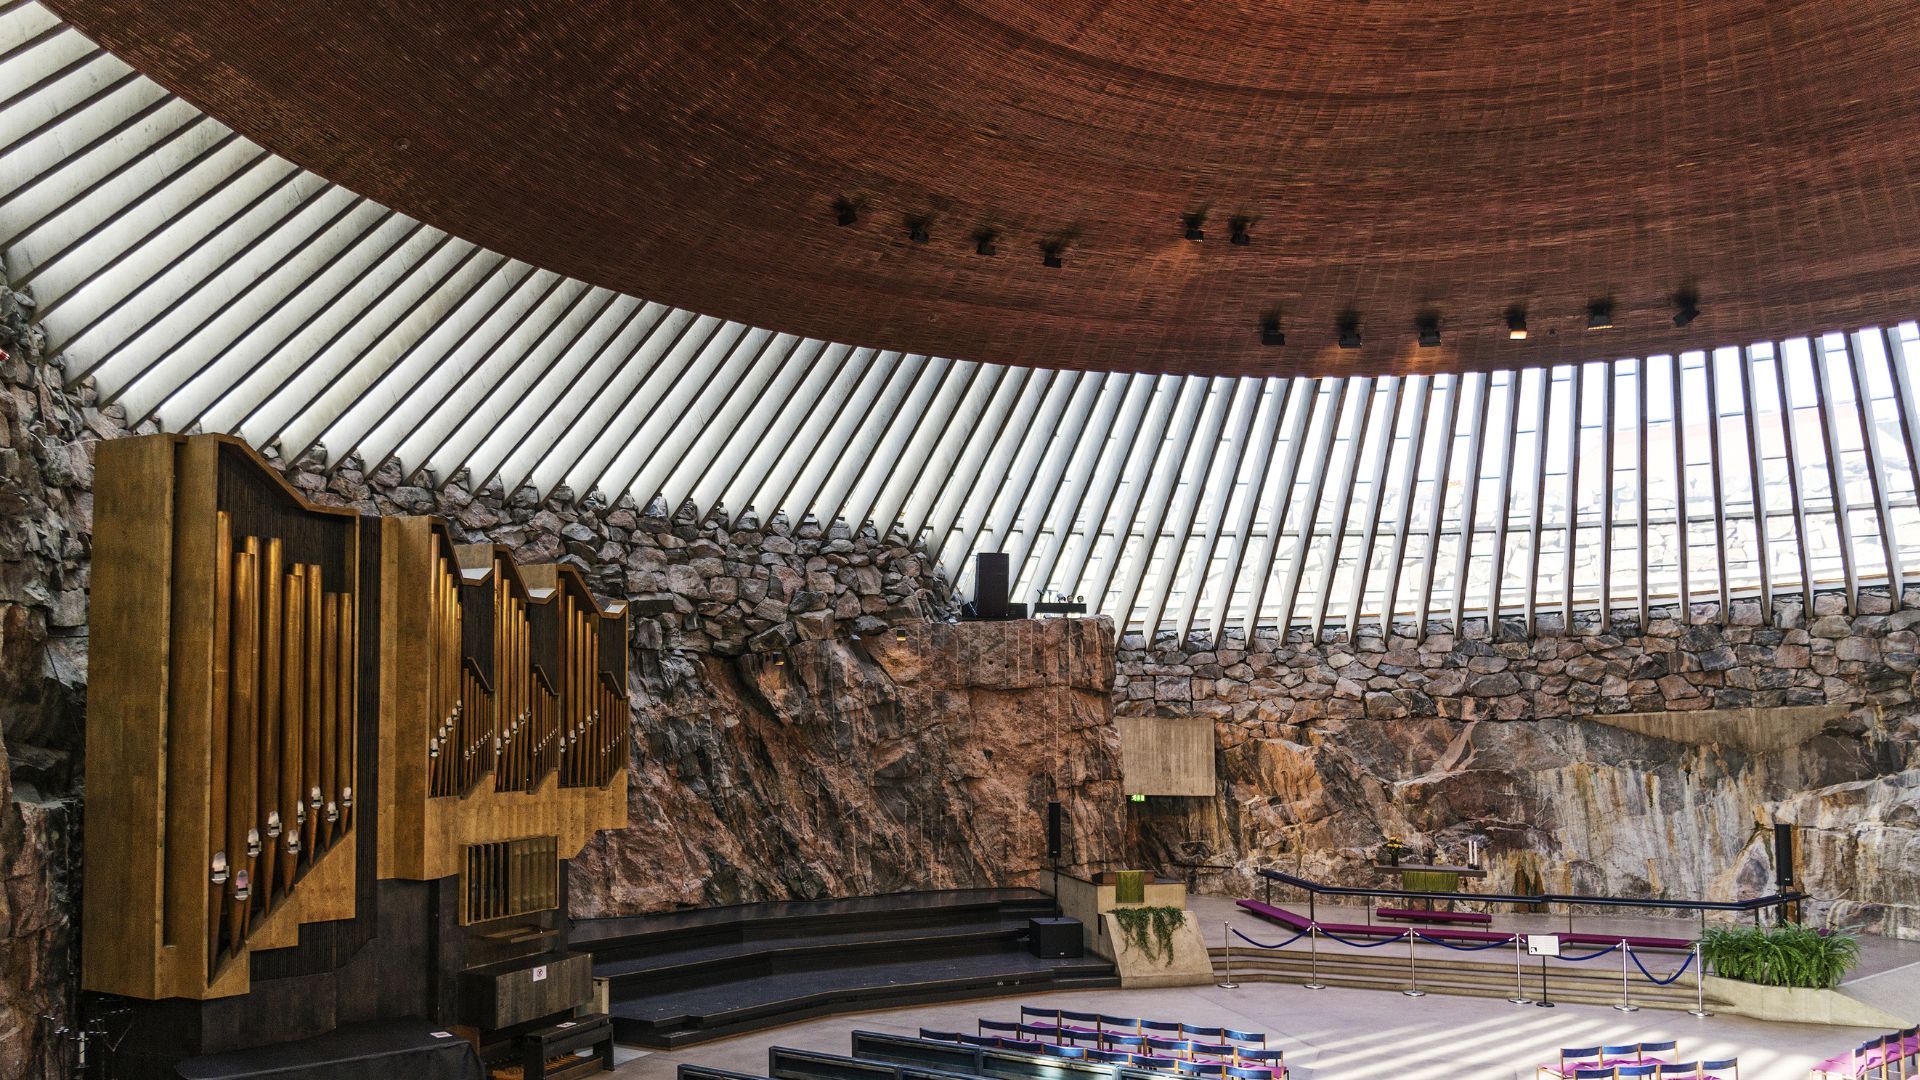 Temppeliaukio Church, Finland - unique temples and churches in the world